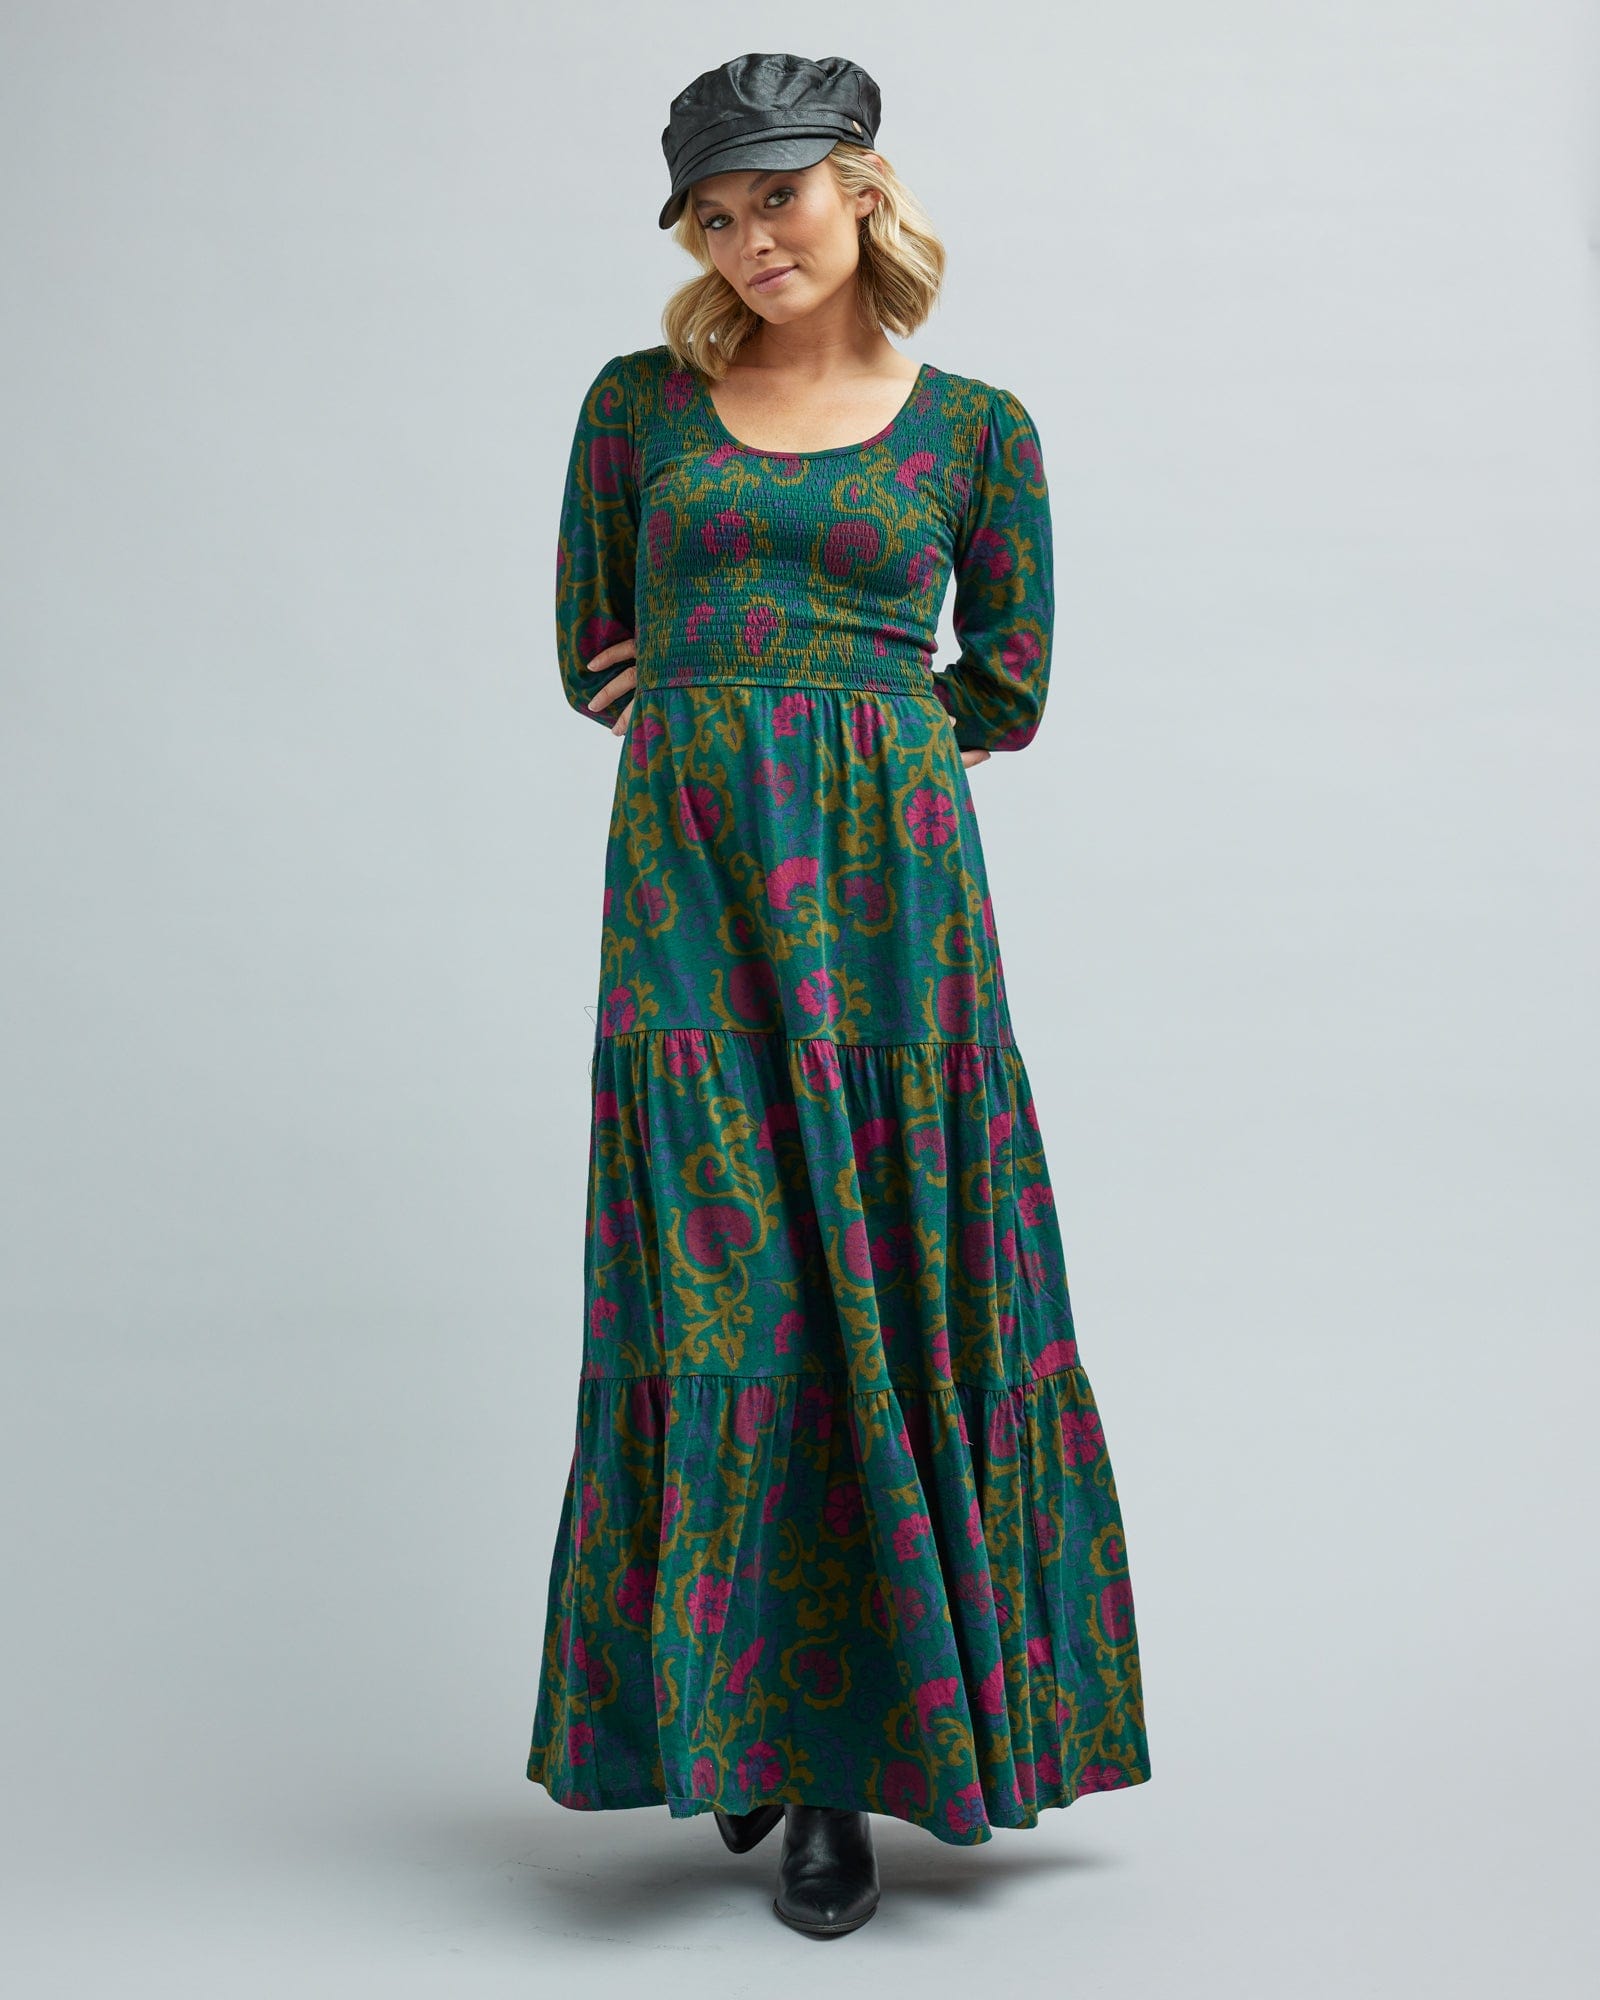 Woman in a long sleeve, tiered maxi dress with orange and green floral print